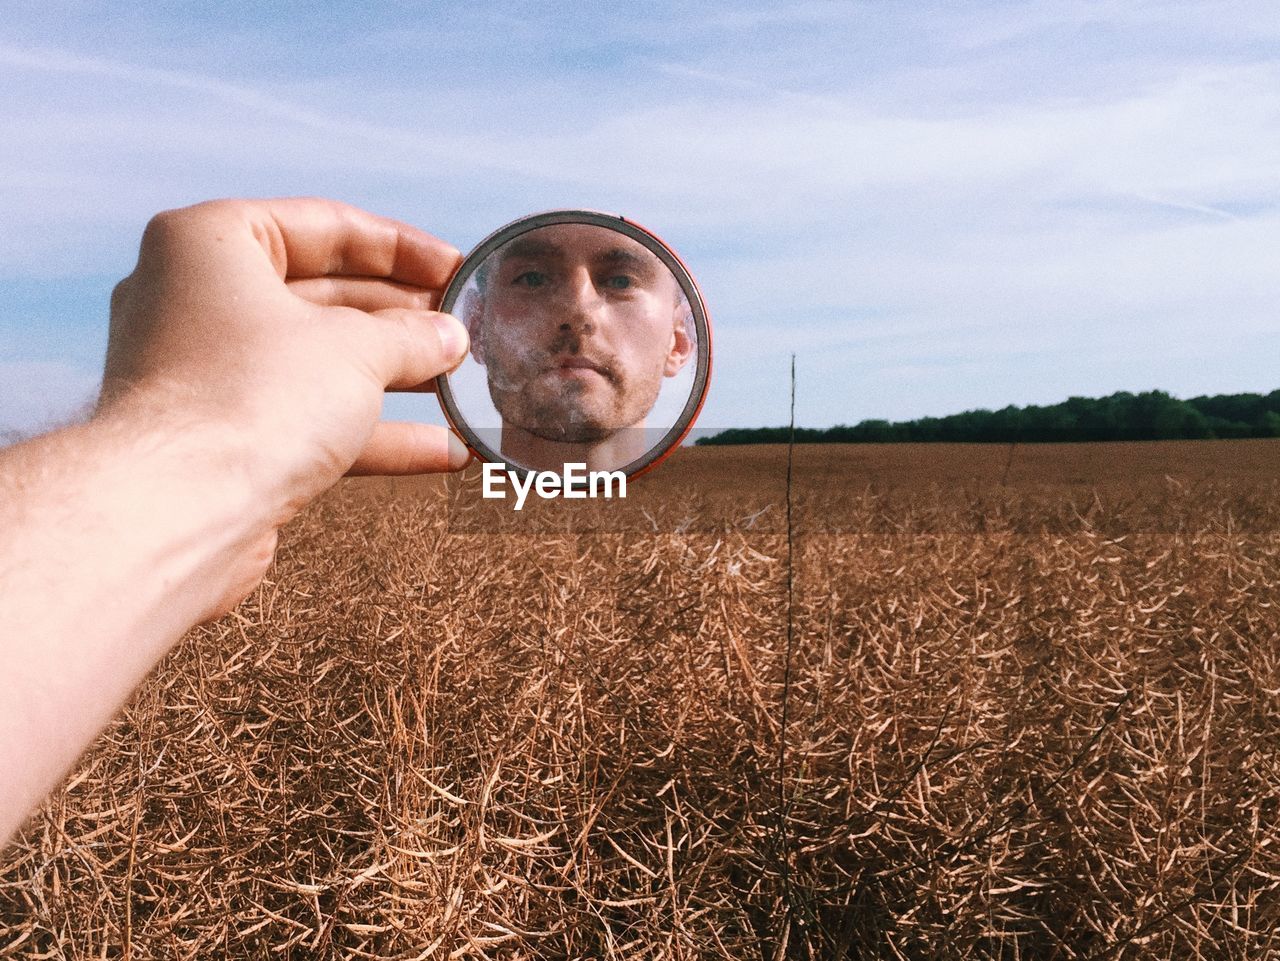 Close-up of man's reflection in mirror against wheat field